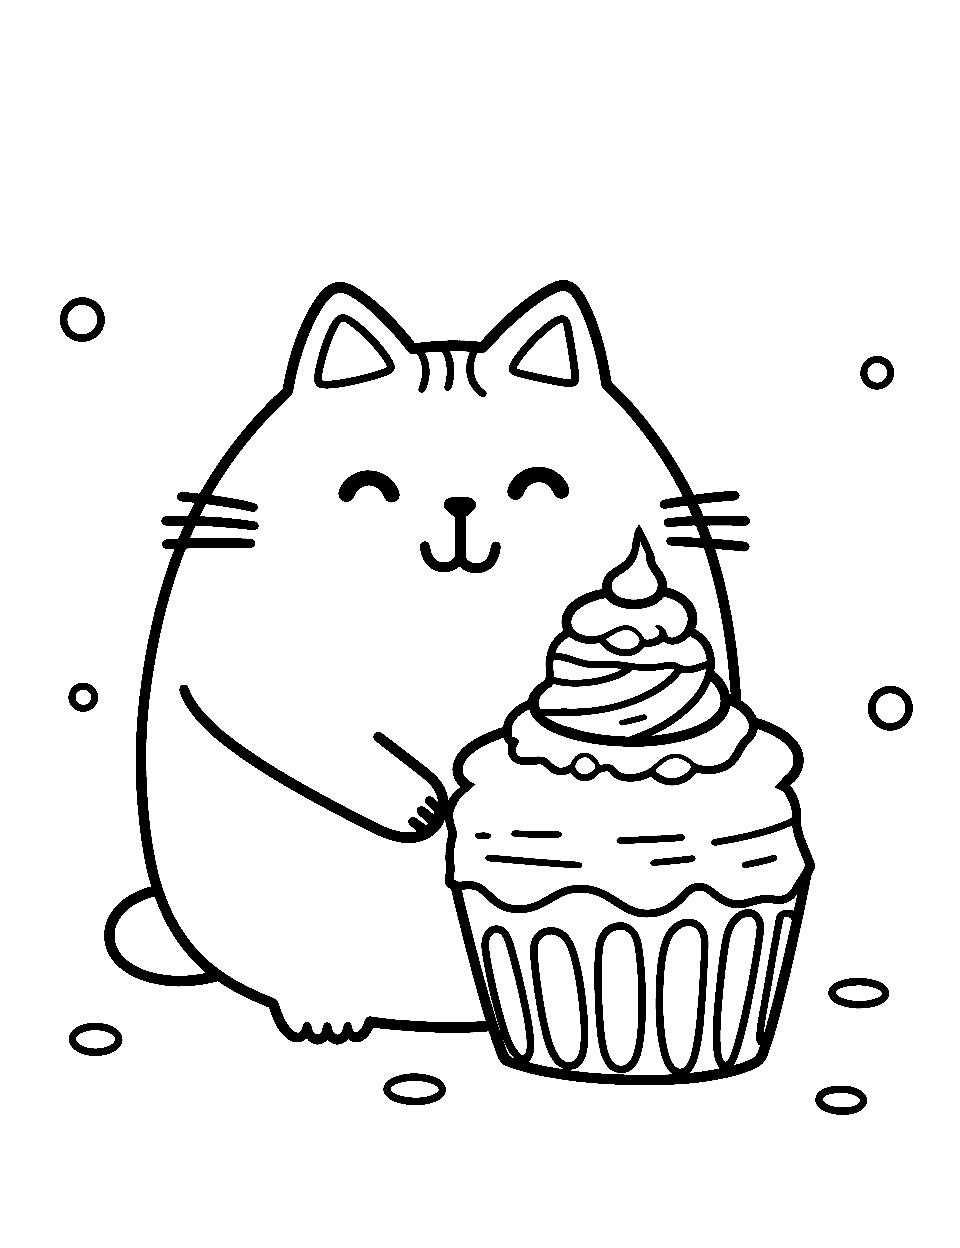 Pusheen's Ice Cream Coloring Page - Pusheen with a big ice cream cake.